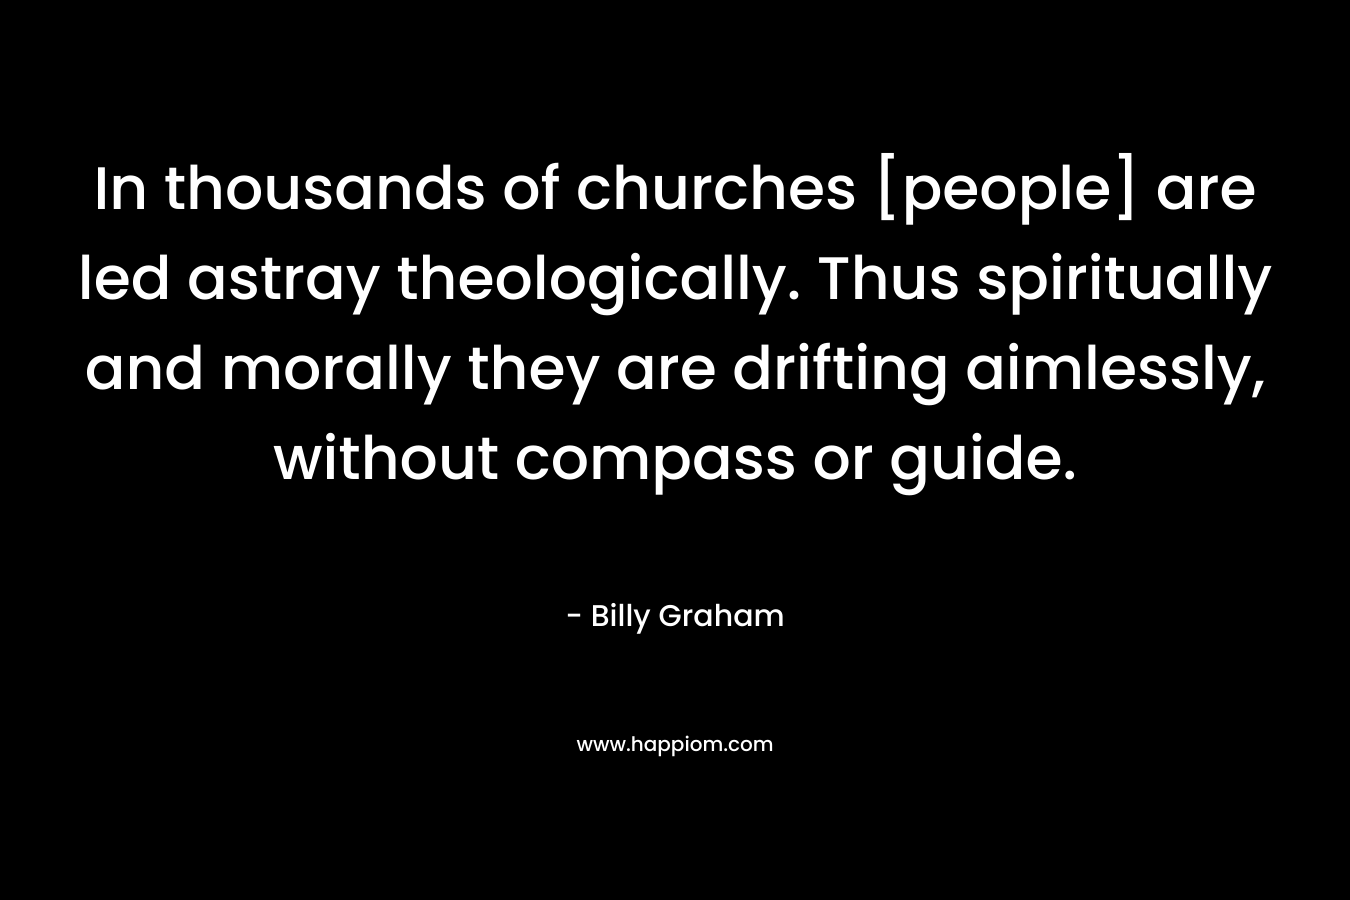 In thousands of churches [people] are led astray theologically. Thus spiritually and morally they are drifting aimlessly, without compass or guide. – Billy Graham